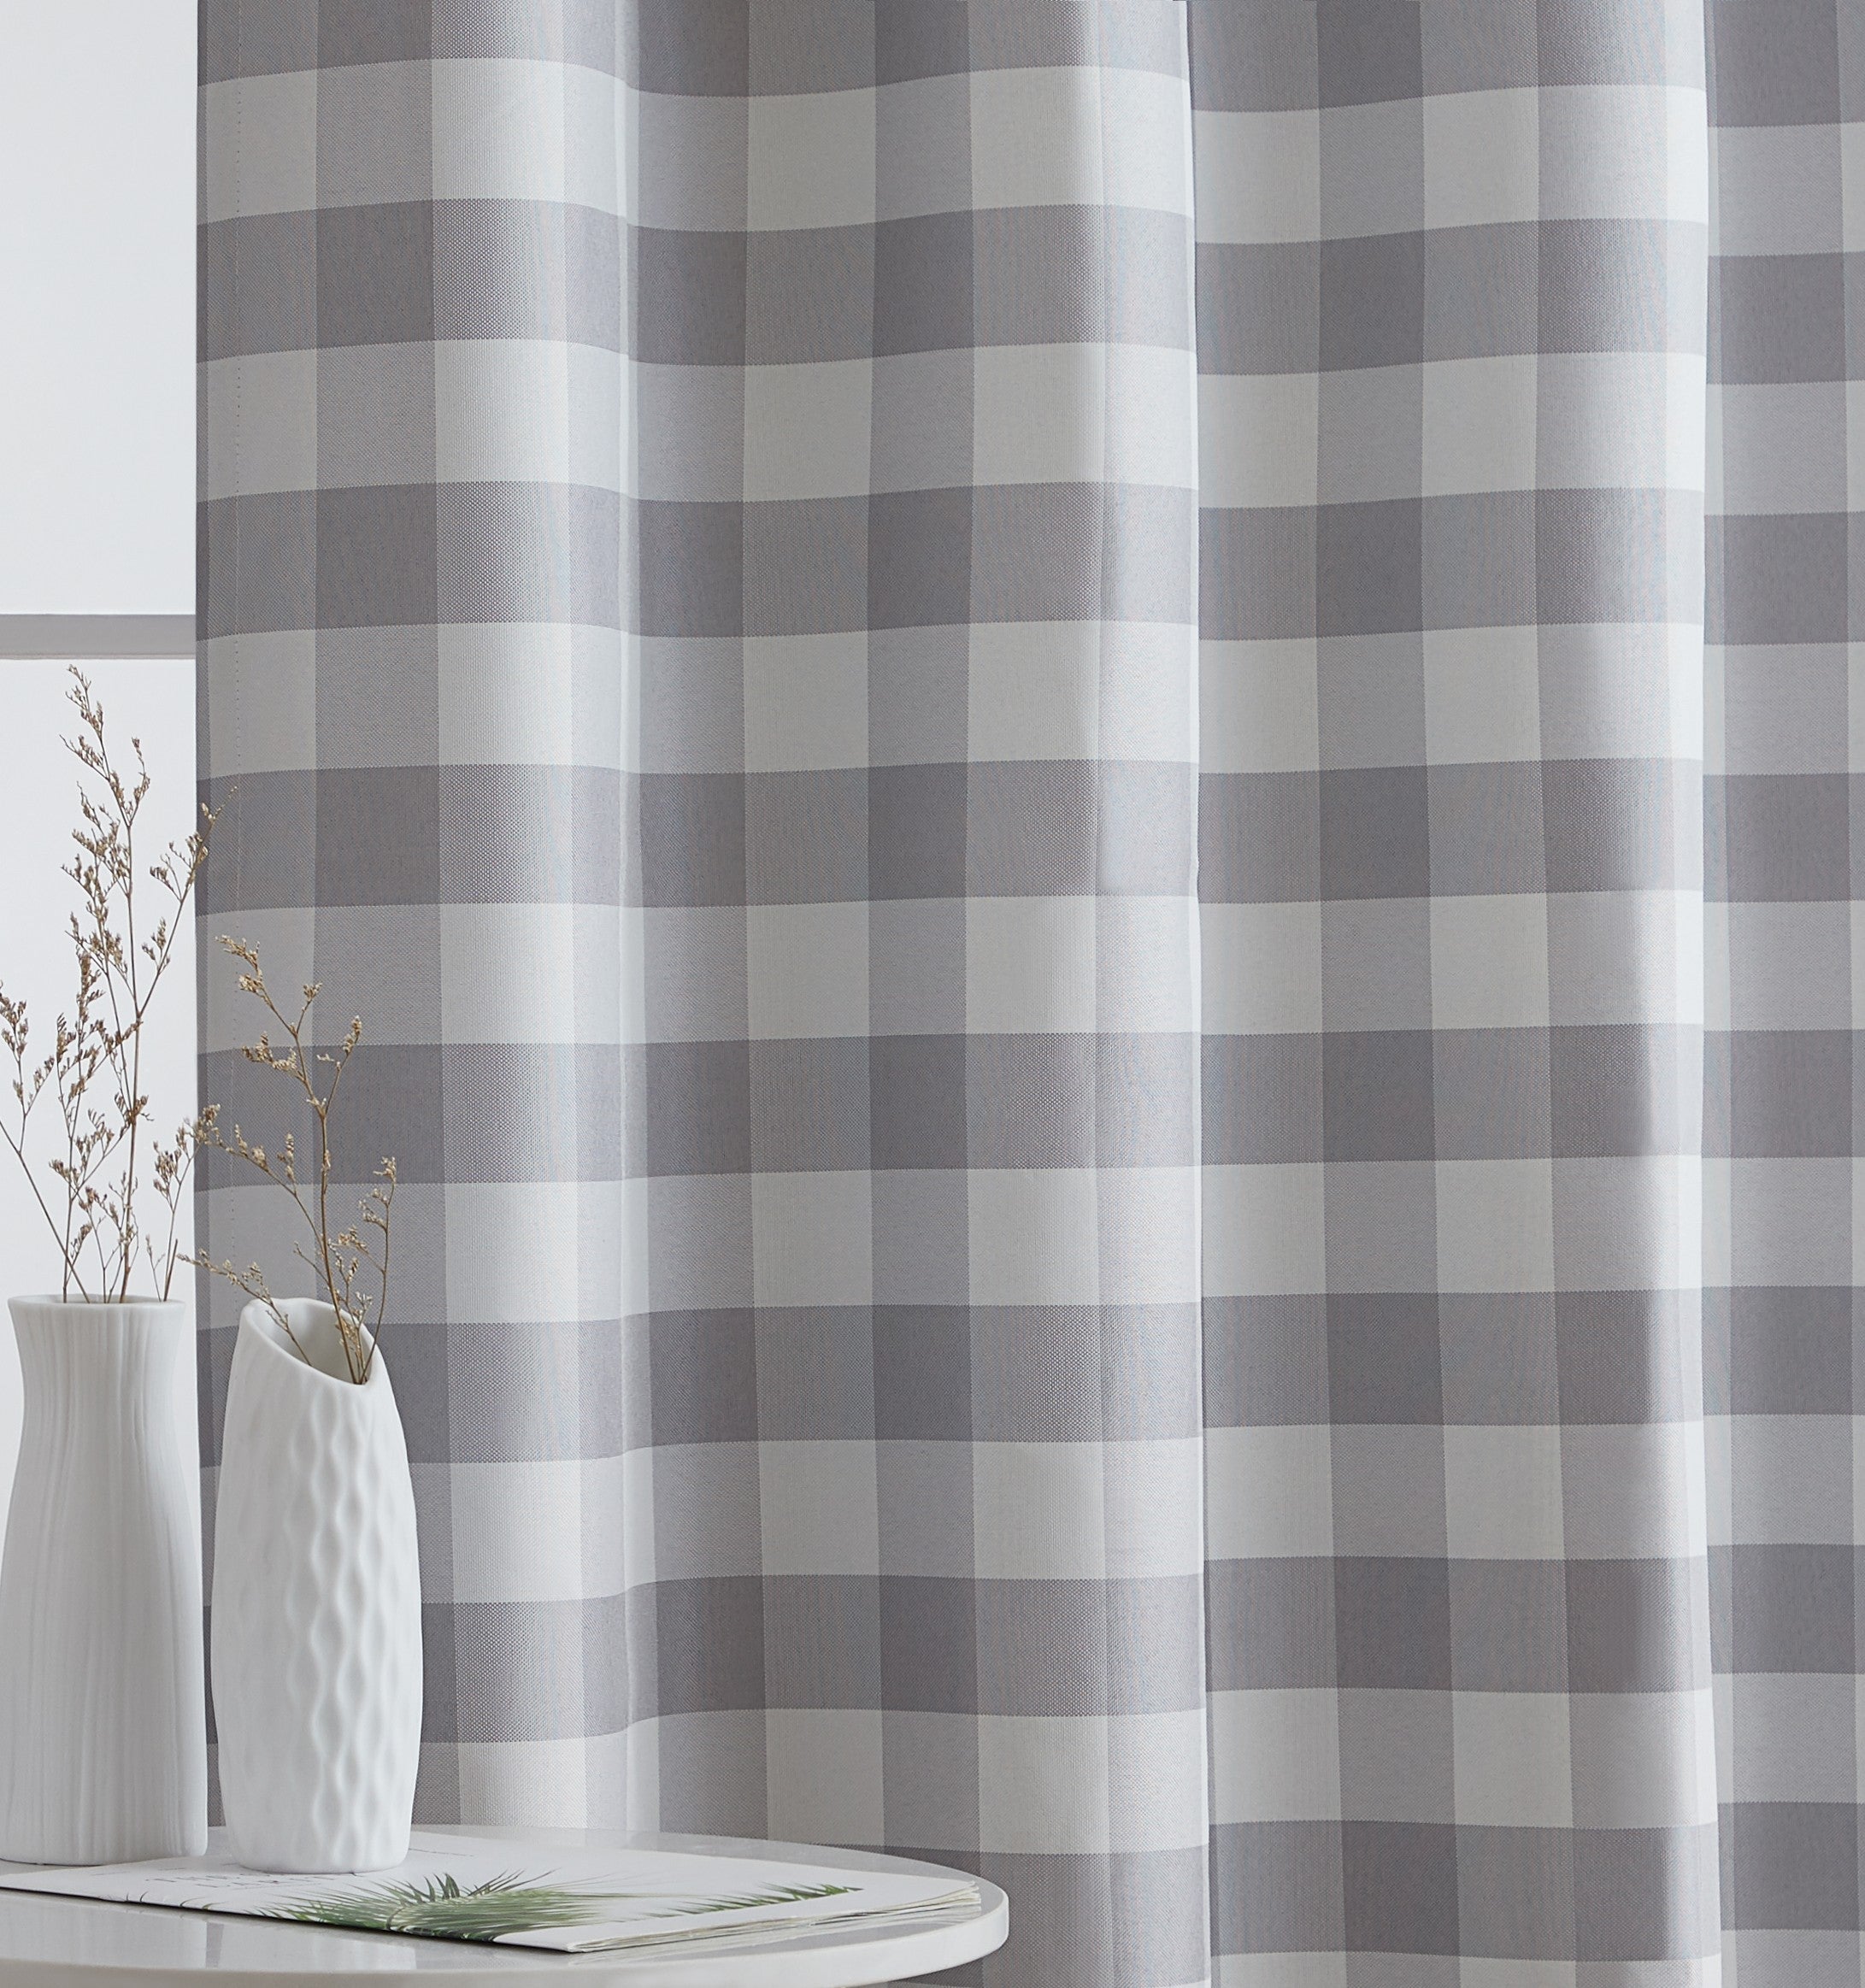 Buffalo Check Plaid Grommet Drapes Thermal Insulated Blackout